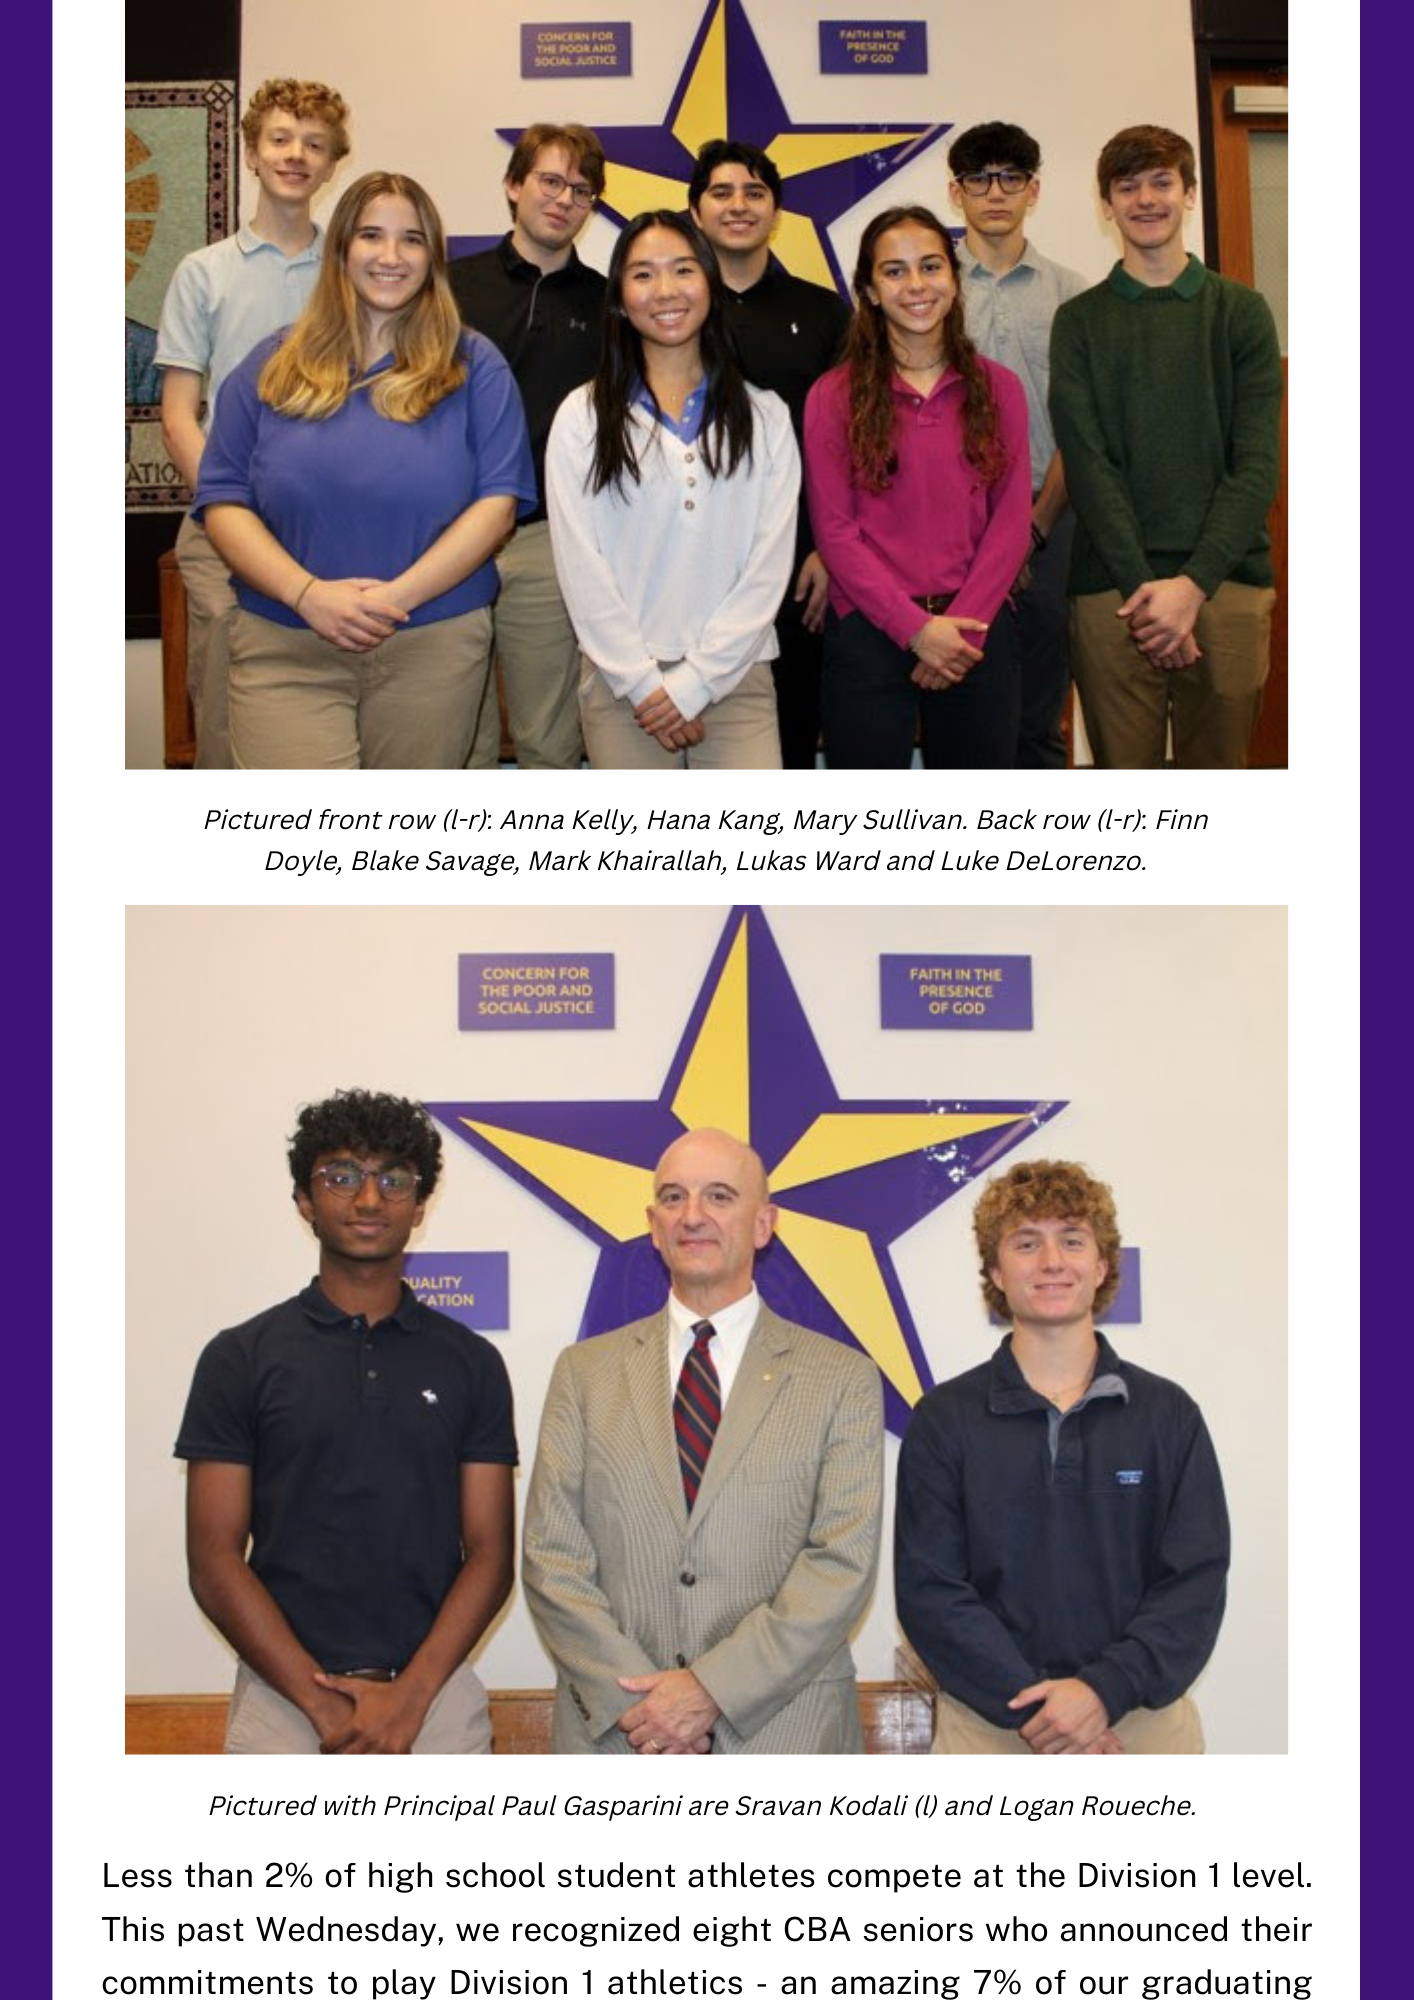 Christian Brothers Academy Syracuse, NY Private School recognize Nation Merit commended students and student athletes announcing commitments to playing Division 1 athletics.